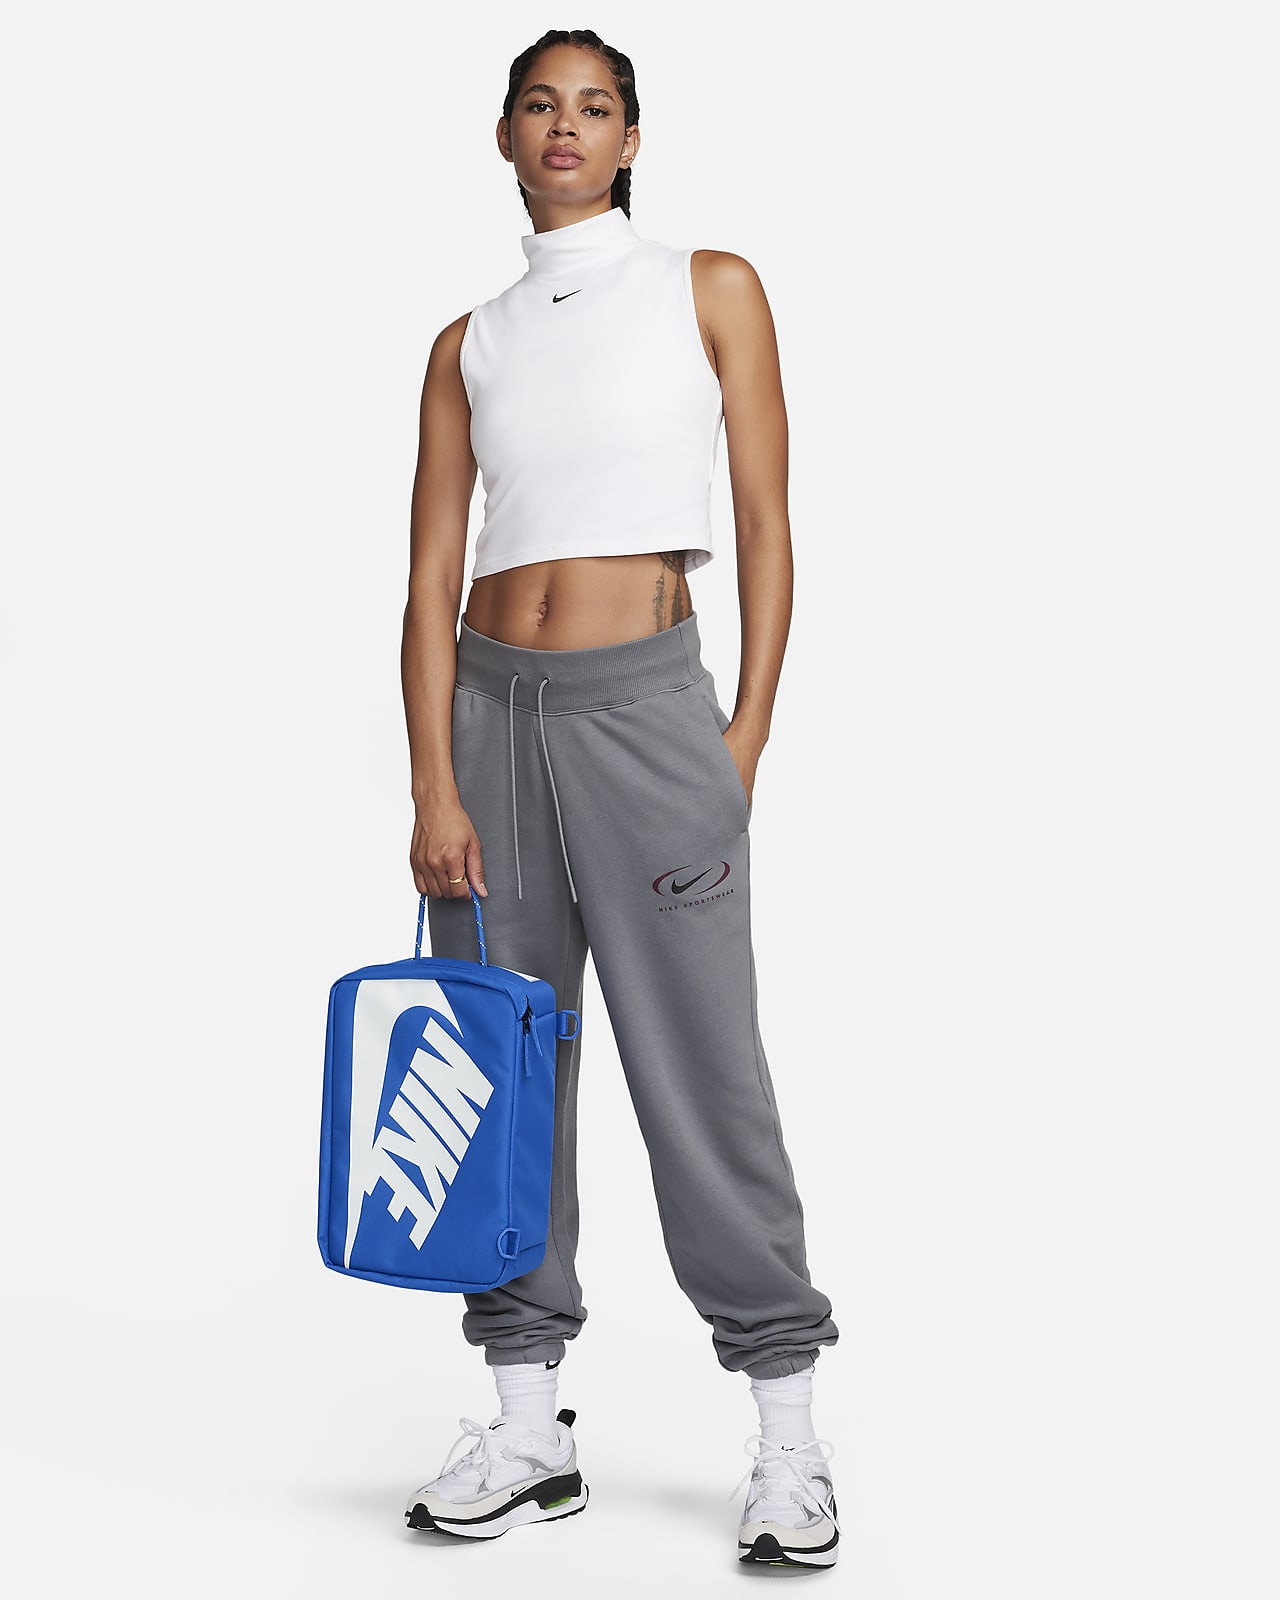 Find Nike bags set of 3 by BlueMoonbazar.in near me | Coimbatore,  Coimbatore, Tamil Nadu | Anar B2B Business App